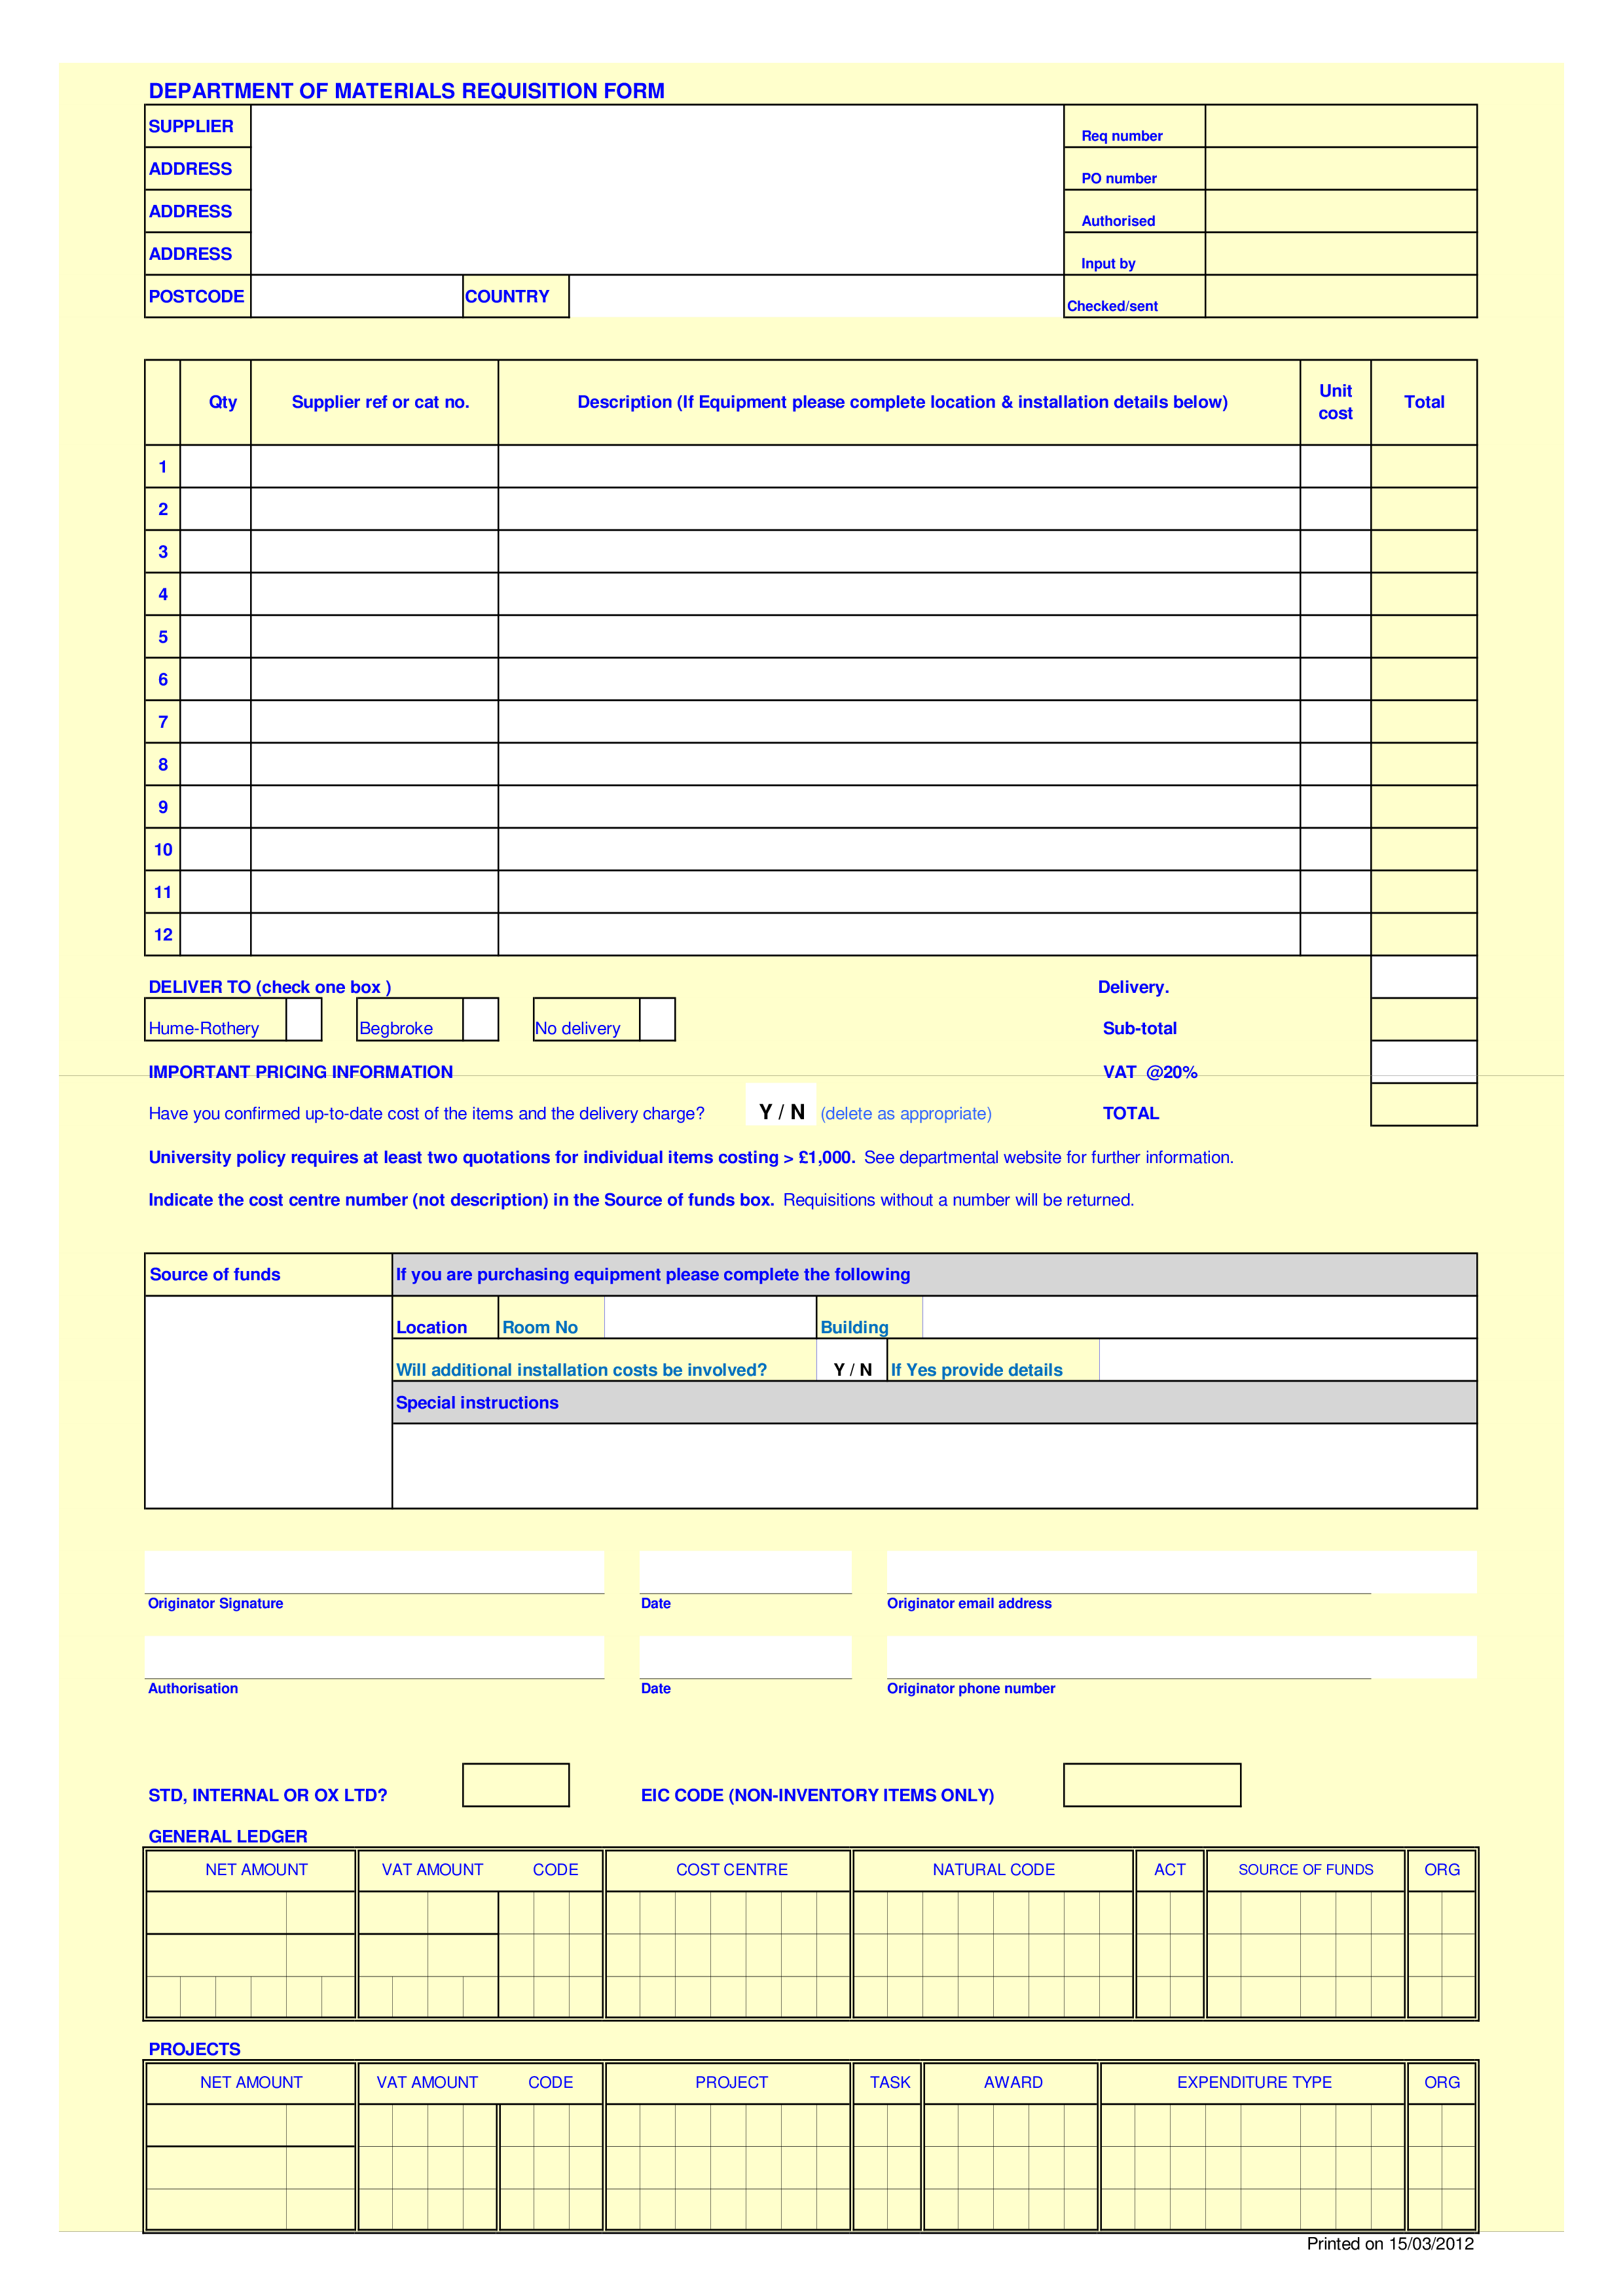 Department Material Requisition Form main image